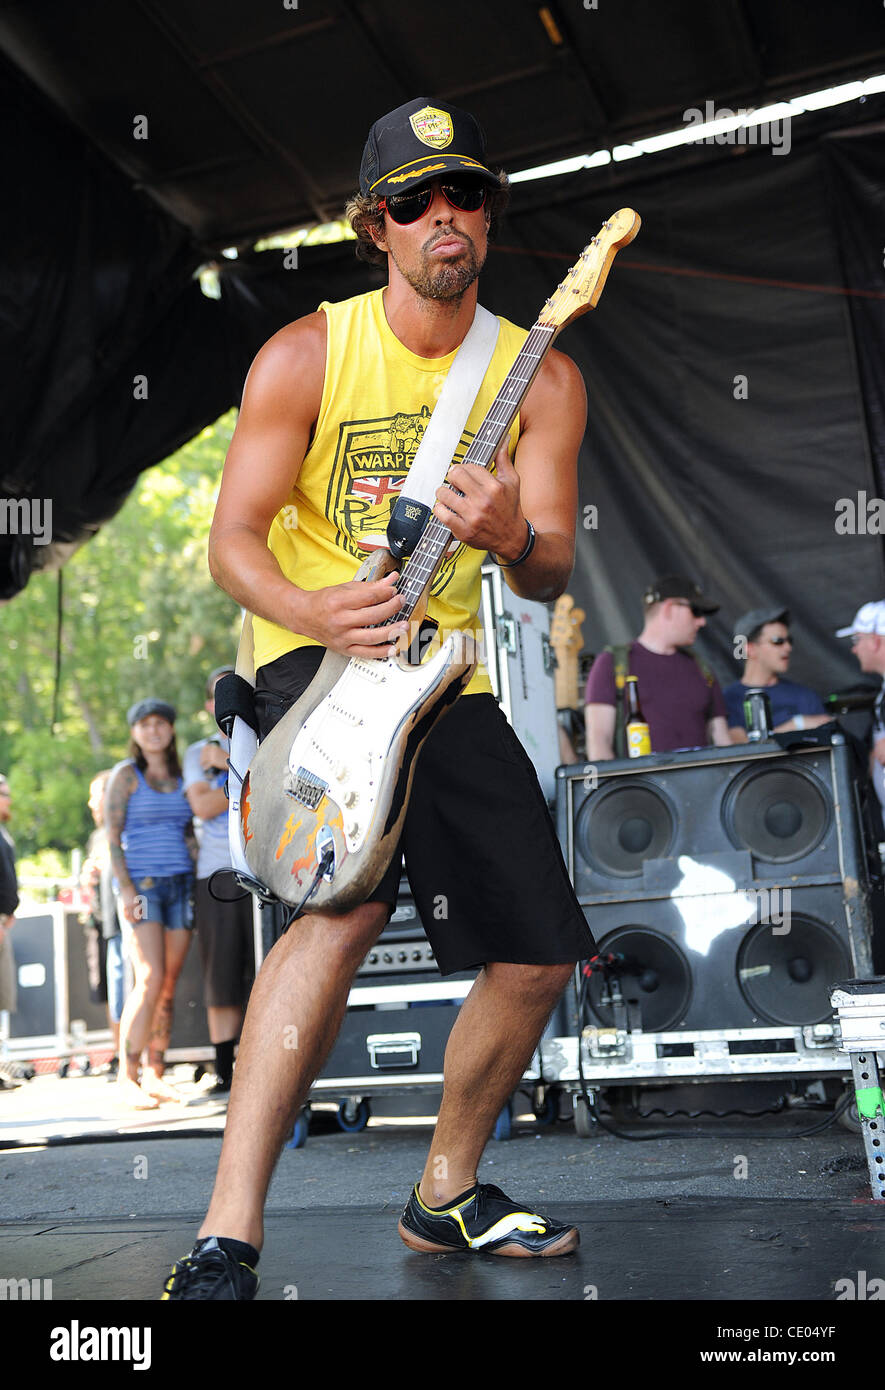 Jul 27, 2011 - Virginia Beach, Virginia; USA - Guitarist KALEO WASSMAN of  the band Pepper performs live as part of the 2011 Vans Warped Tour that  took place at the Farm